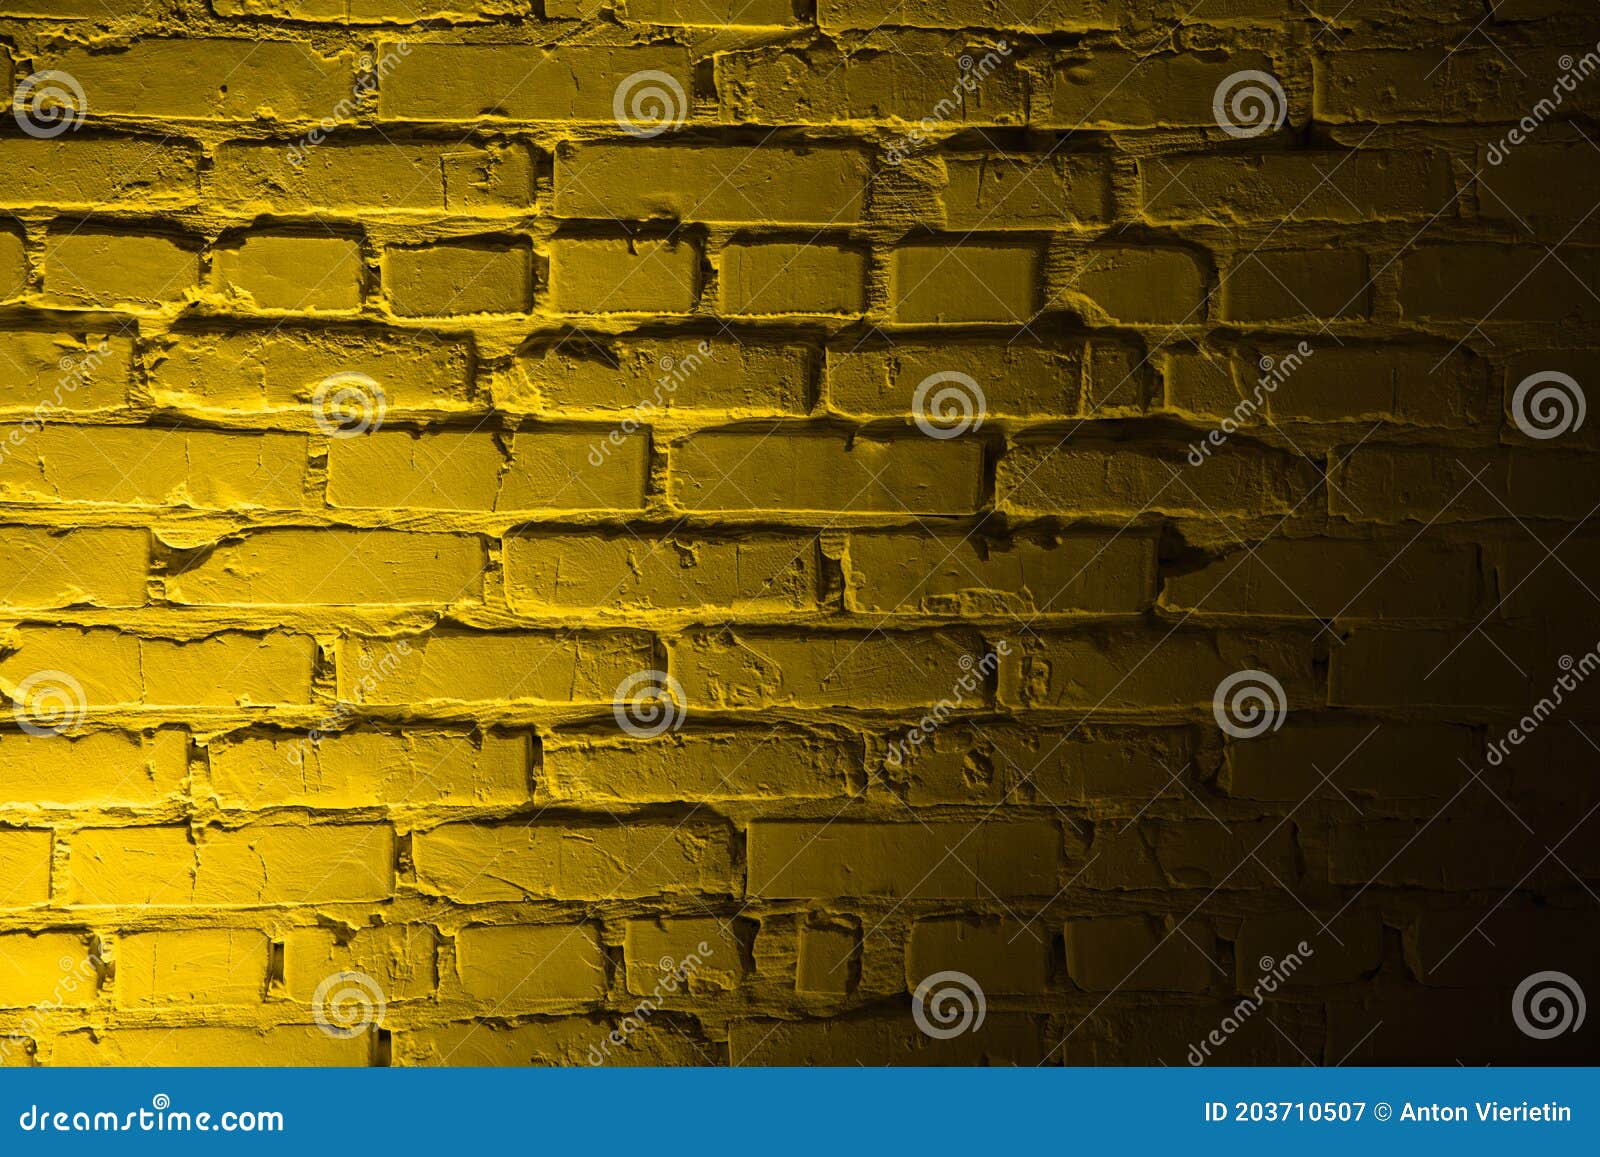 Background of Empty Brick Wall with Yellow Neon Light Stock Image - Image  of isolated, abstract: 203710507